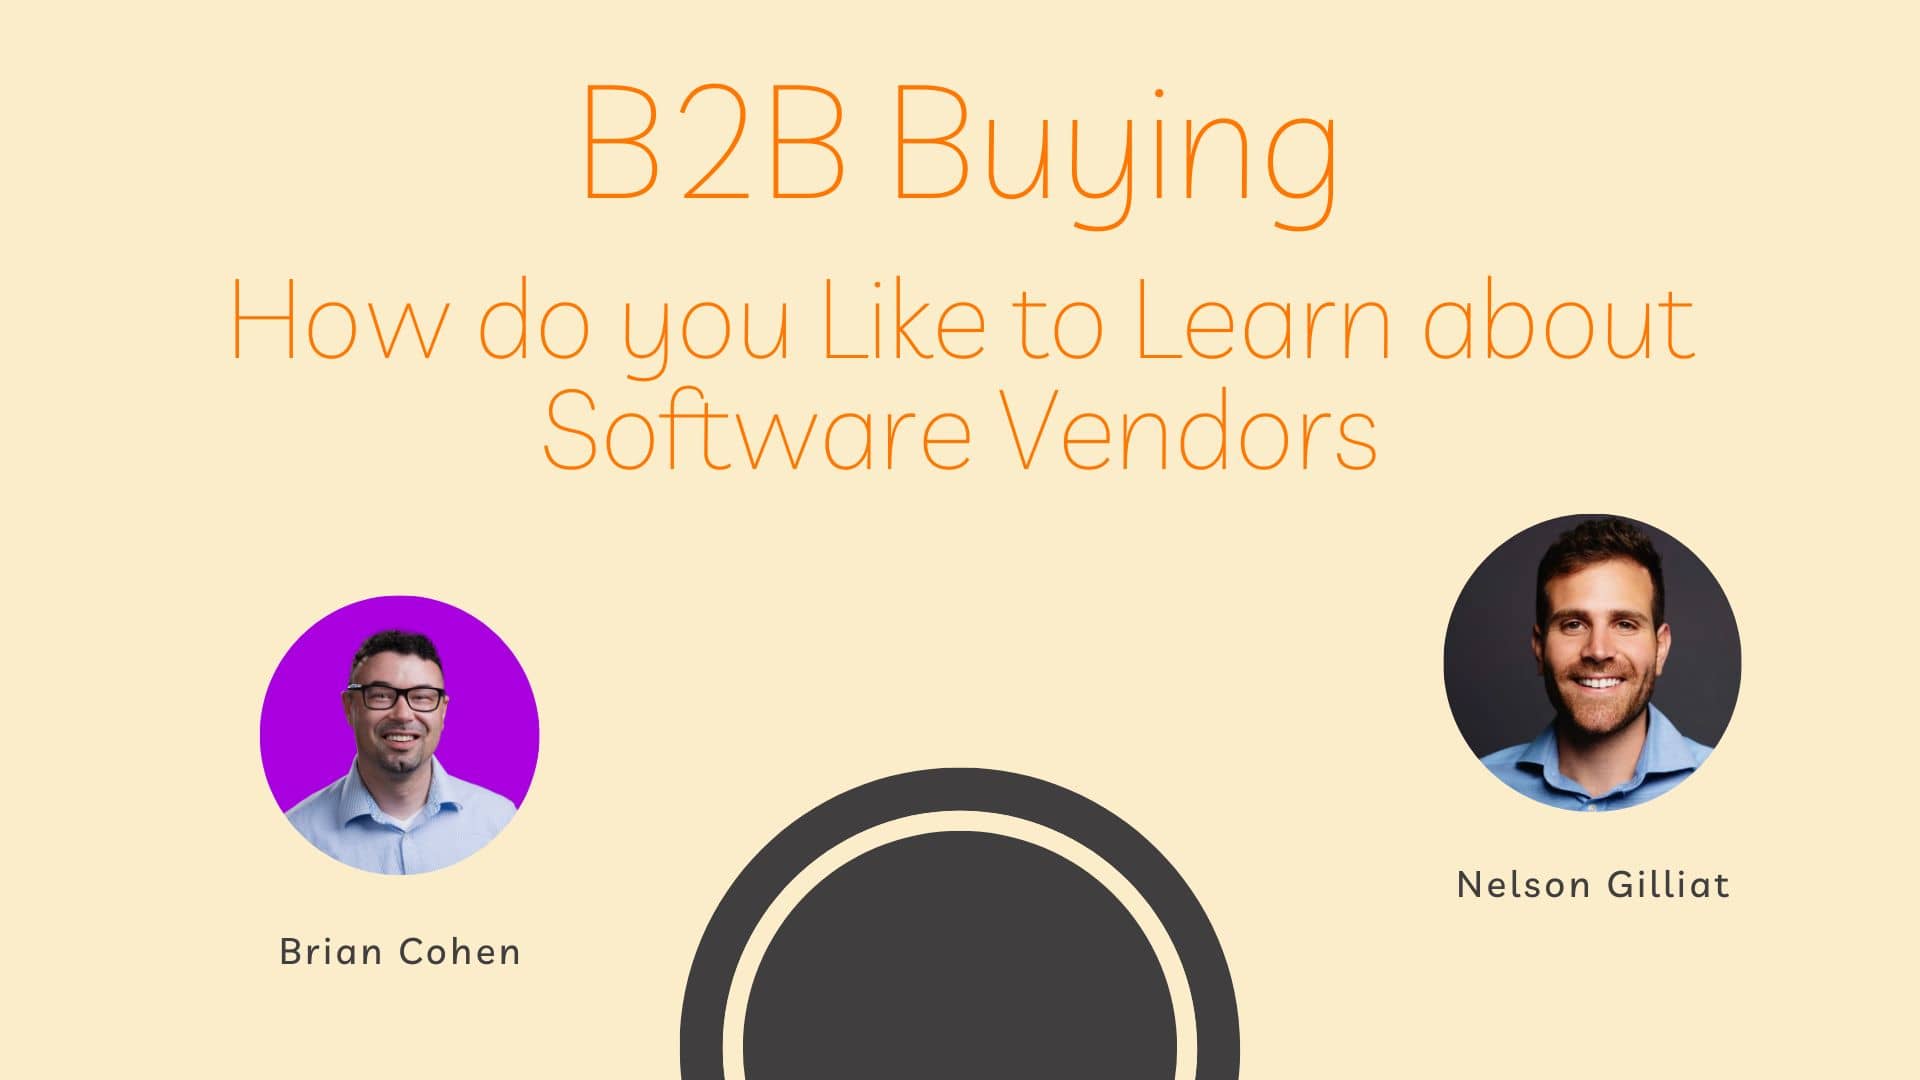 B2B Buying - How do you Like to Learn about Software Vendors